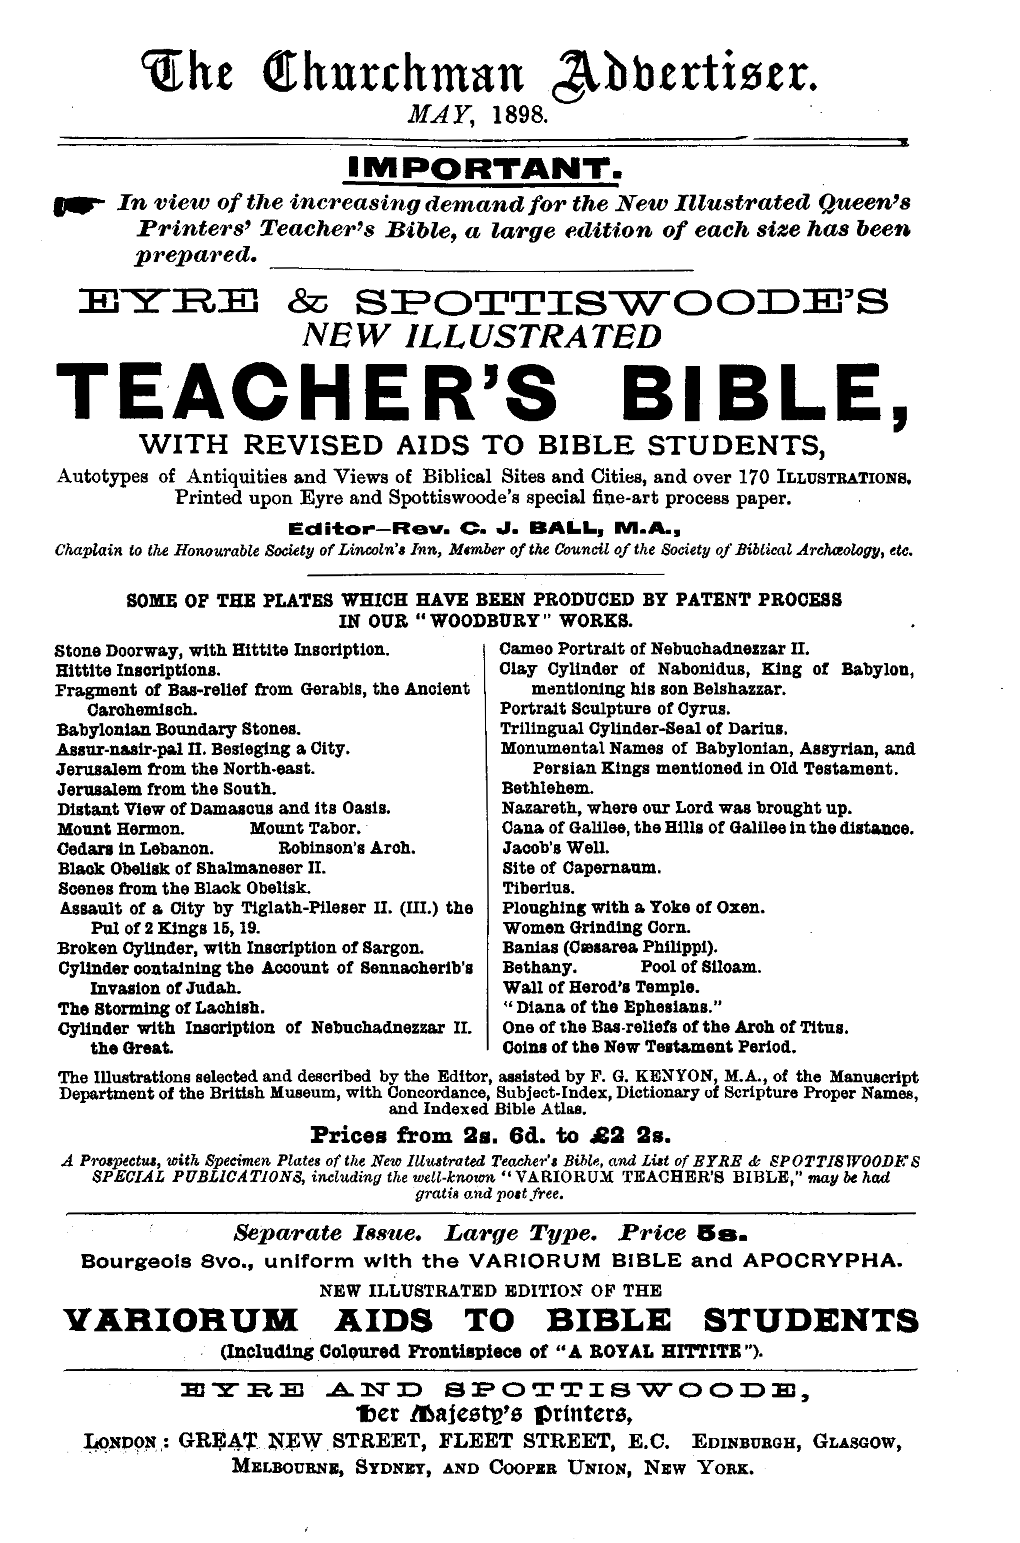 Teacher's Bible, a Large Edition of Each Size Has Been Prepared